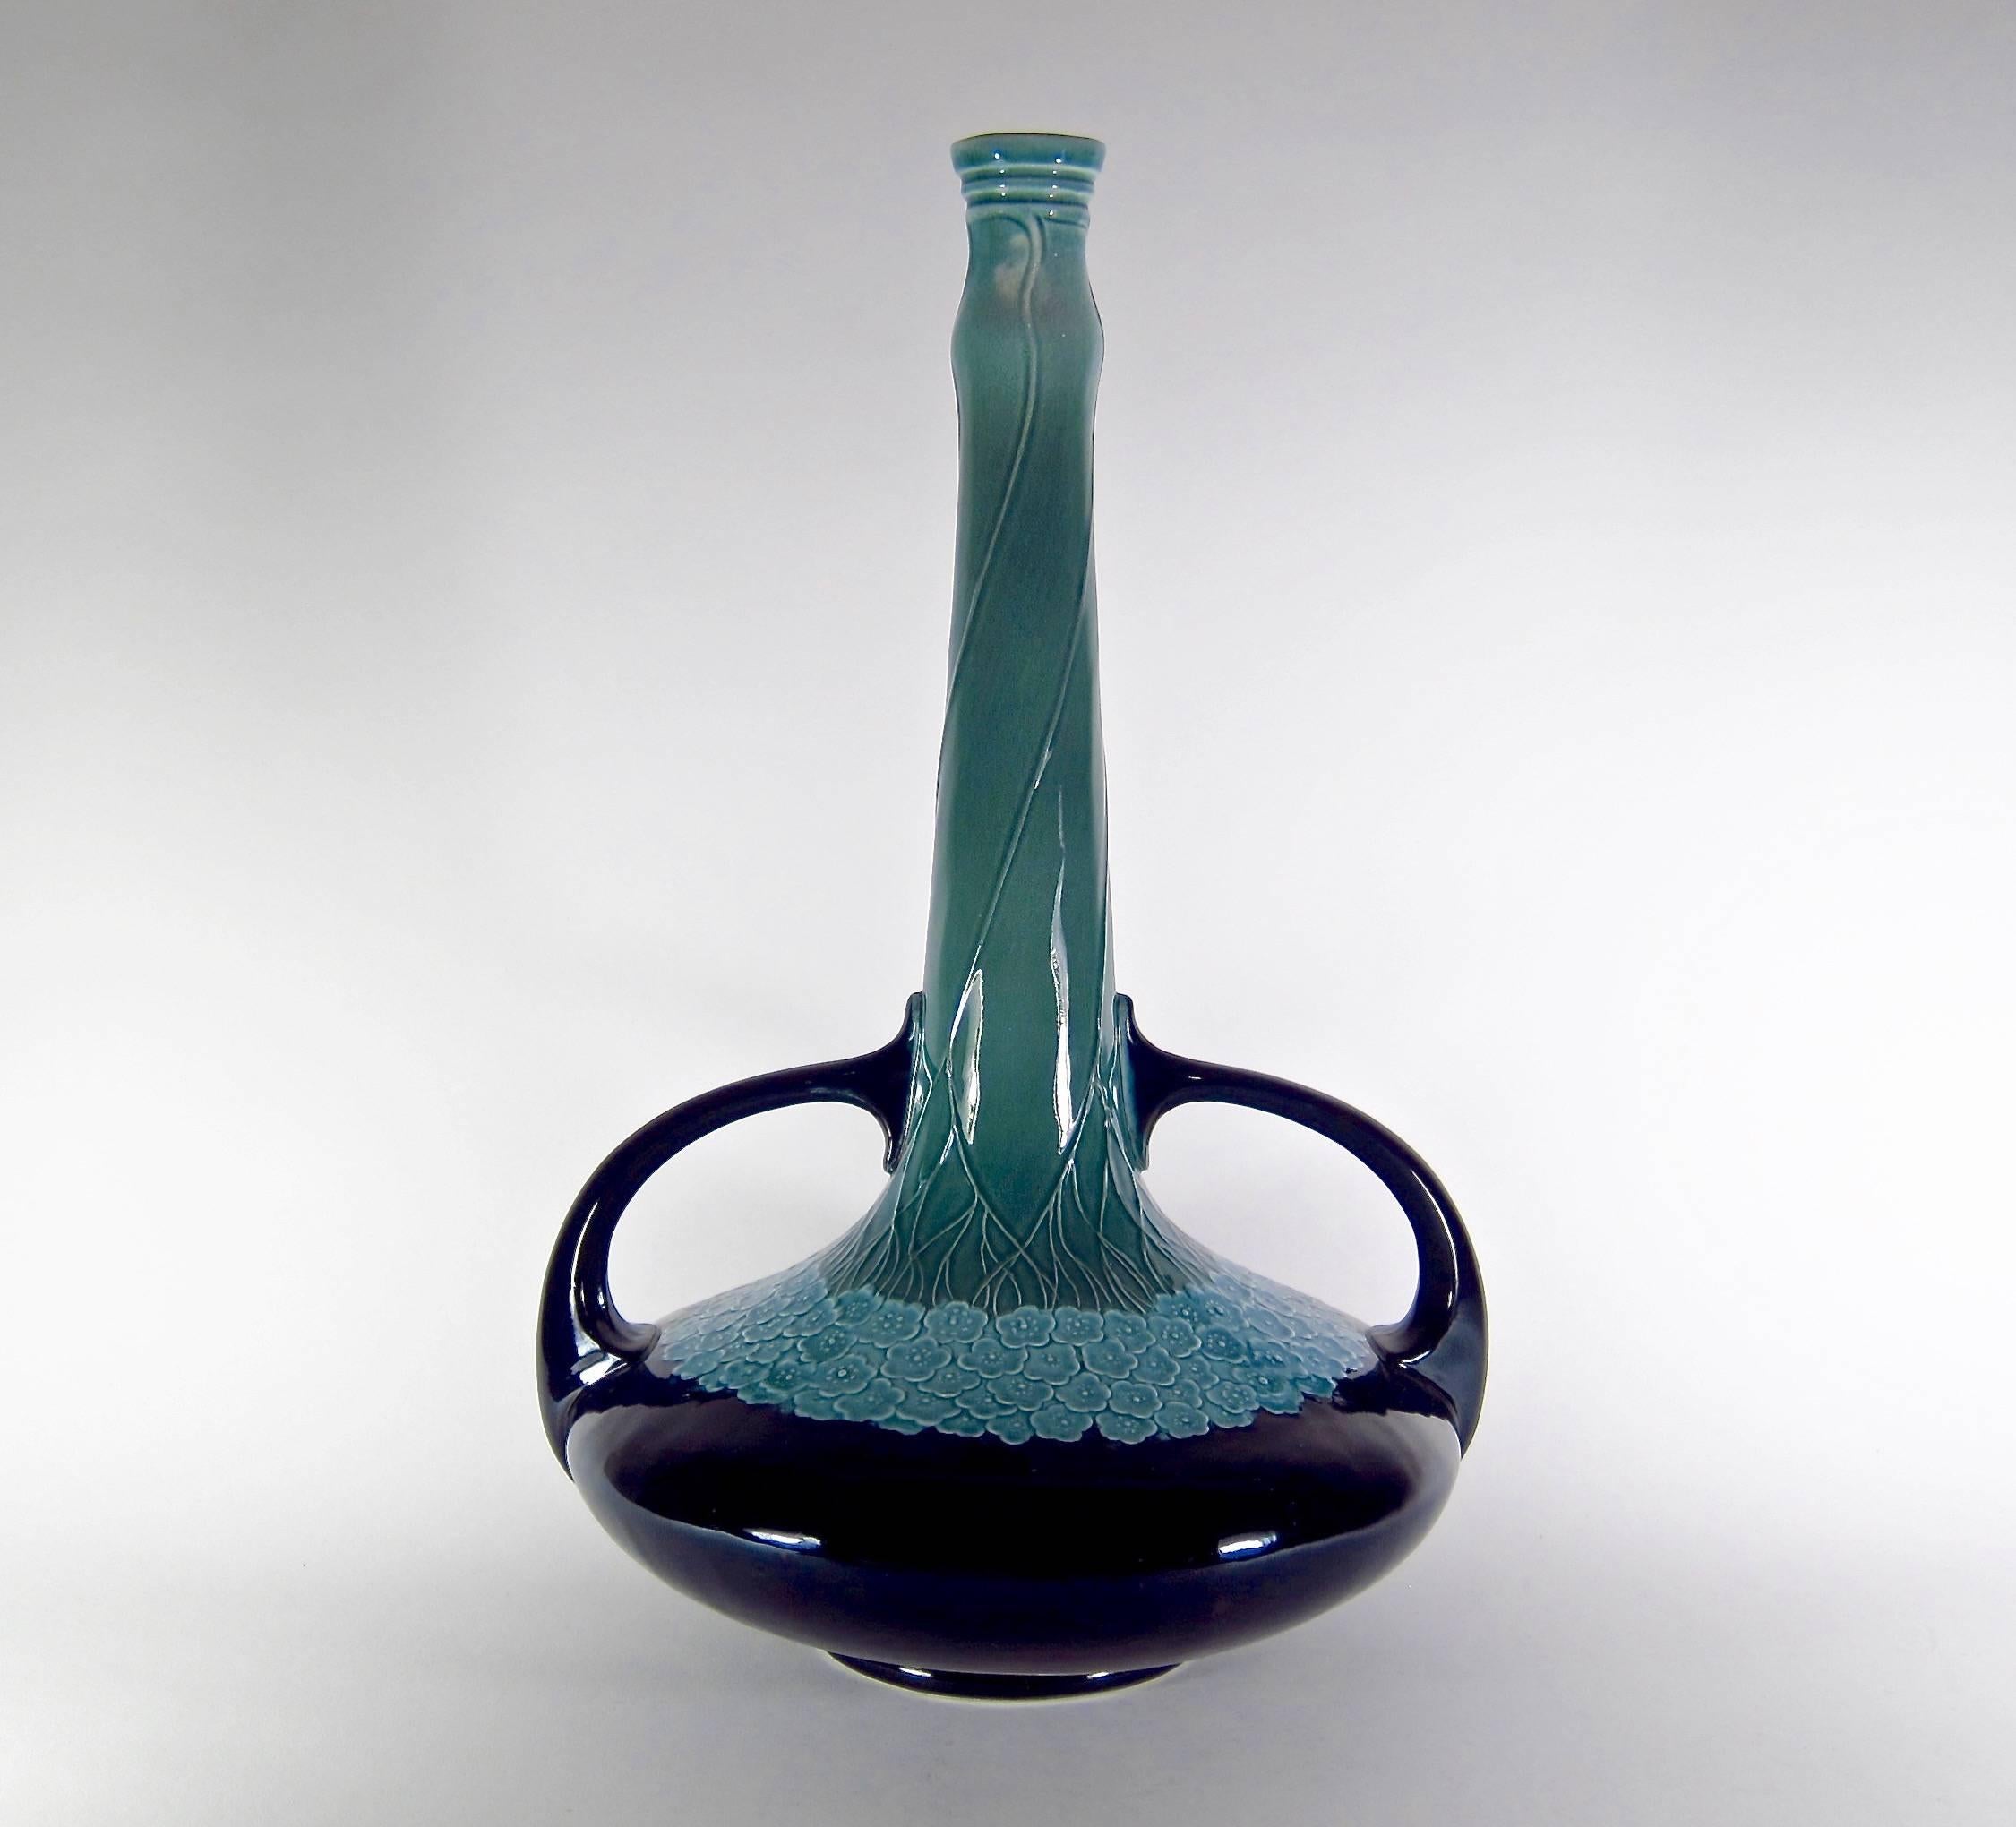 German Art Nouveau Vase from Villeroy and Boch Mettlach, Marked 1904